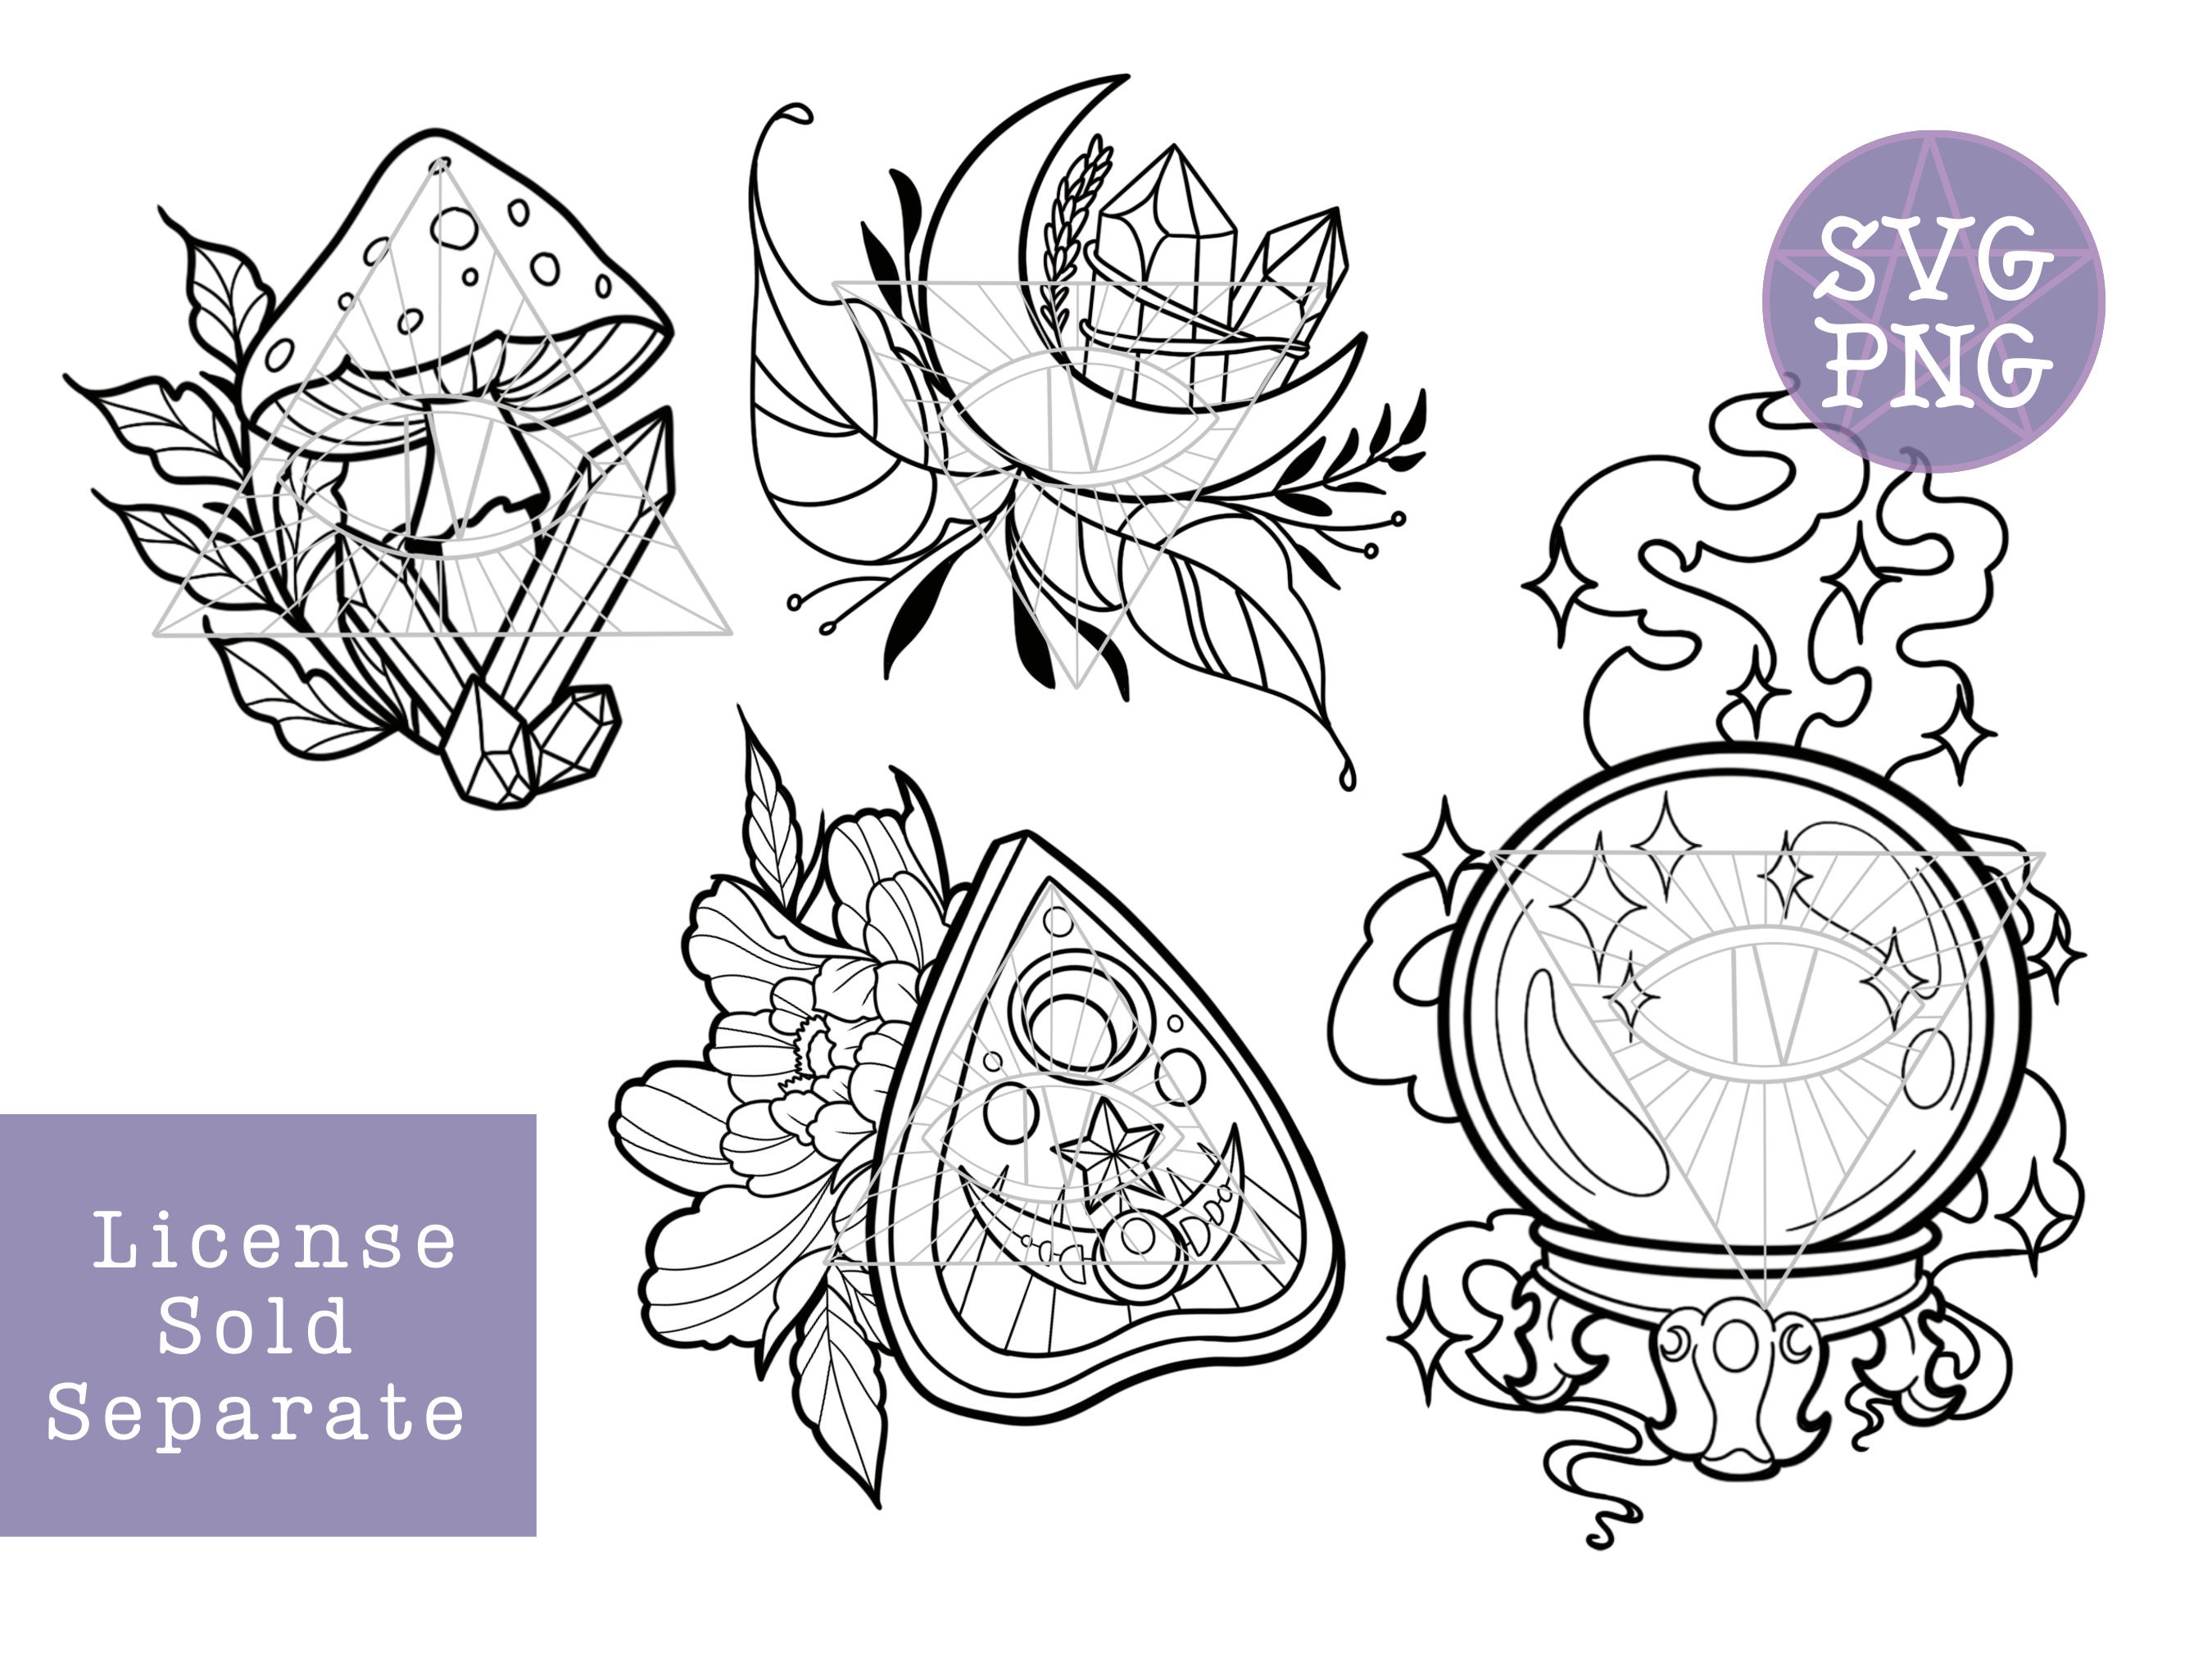 eleanor on Twitter taylor swift  folklore inspired flash sheets a  tattoo for every song these were so fun to do and you cant say im not  speedy  taylorswift13 httpstcoP2IcjE2DwA 